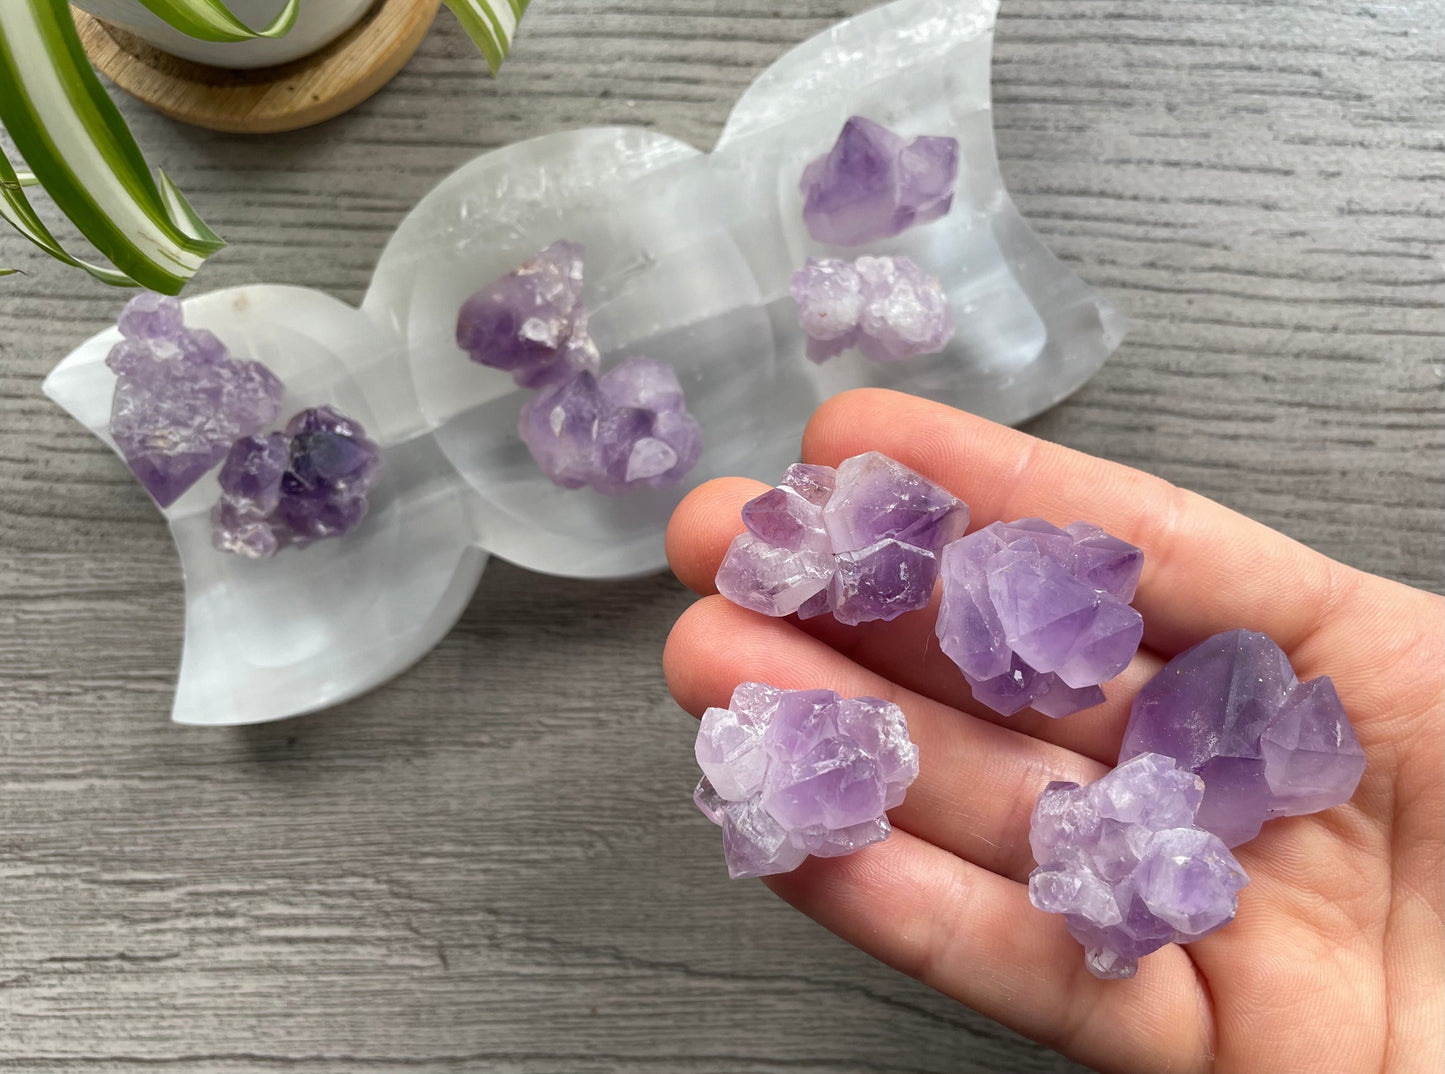 Pictured are various pieces of raw amethyst clusters.